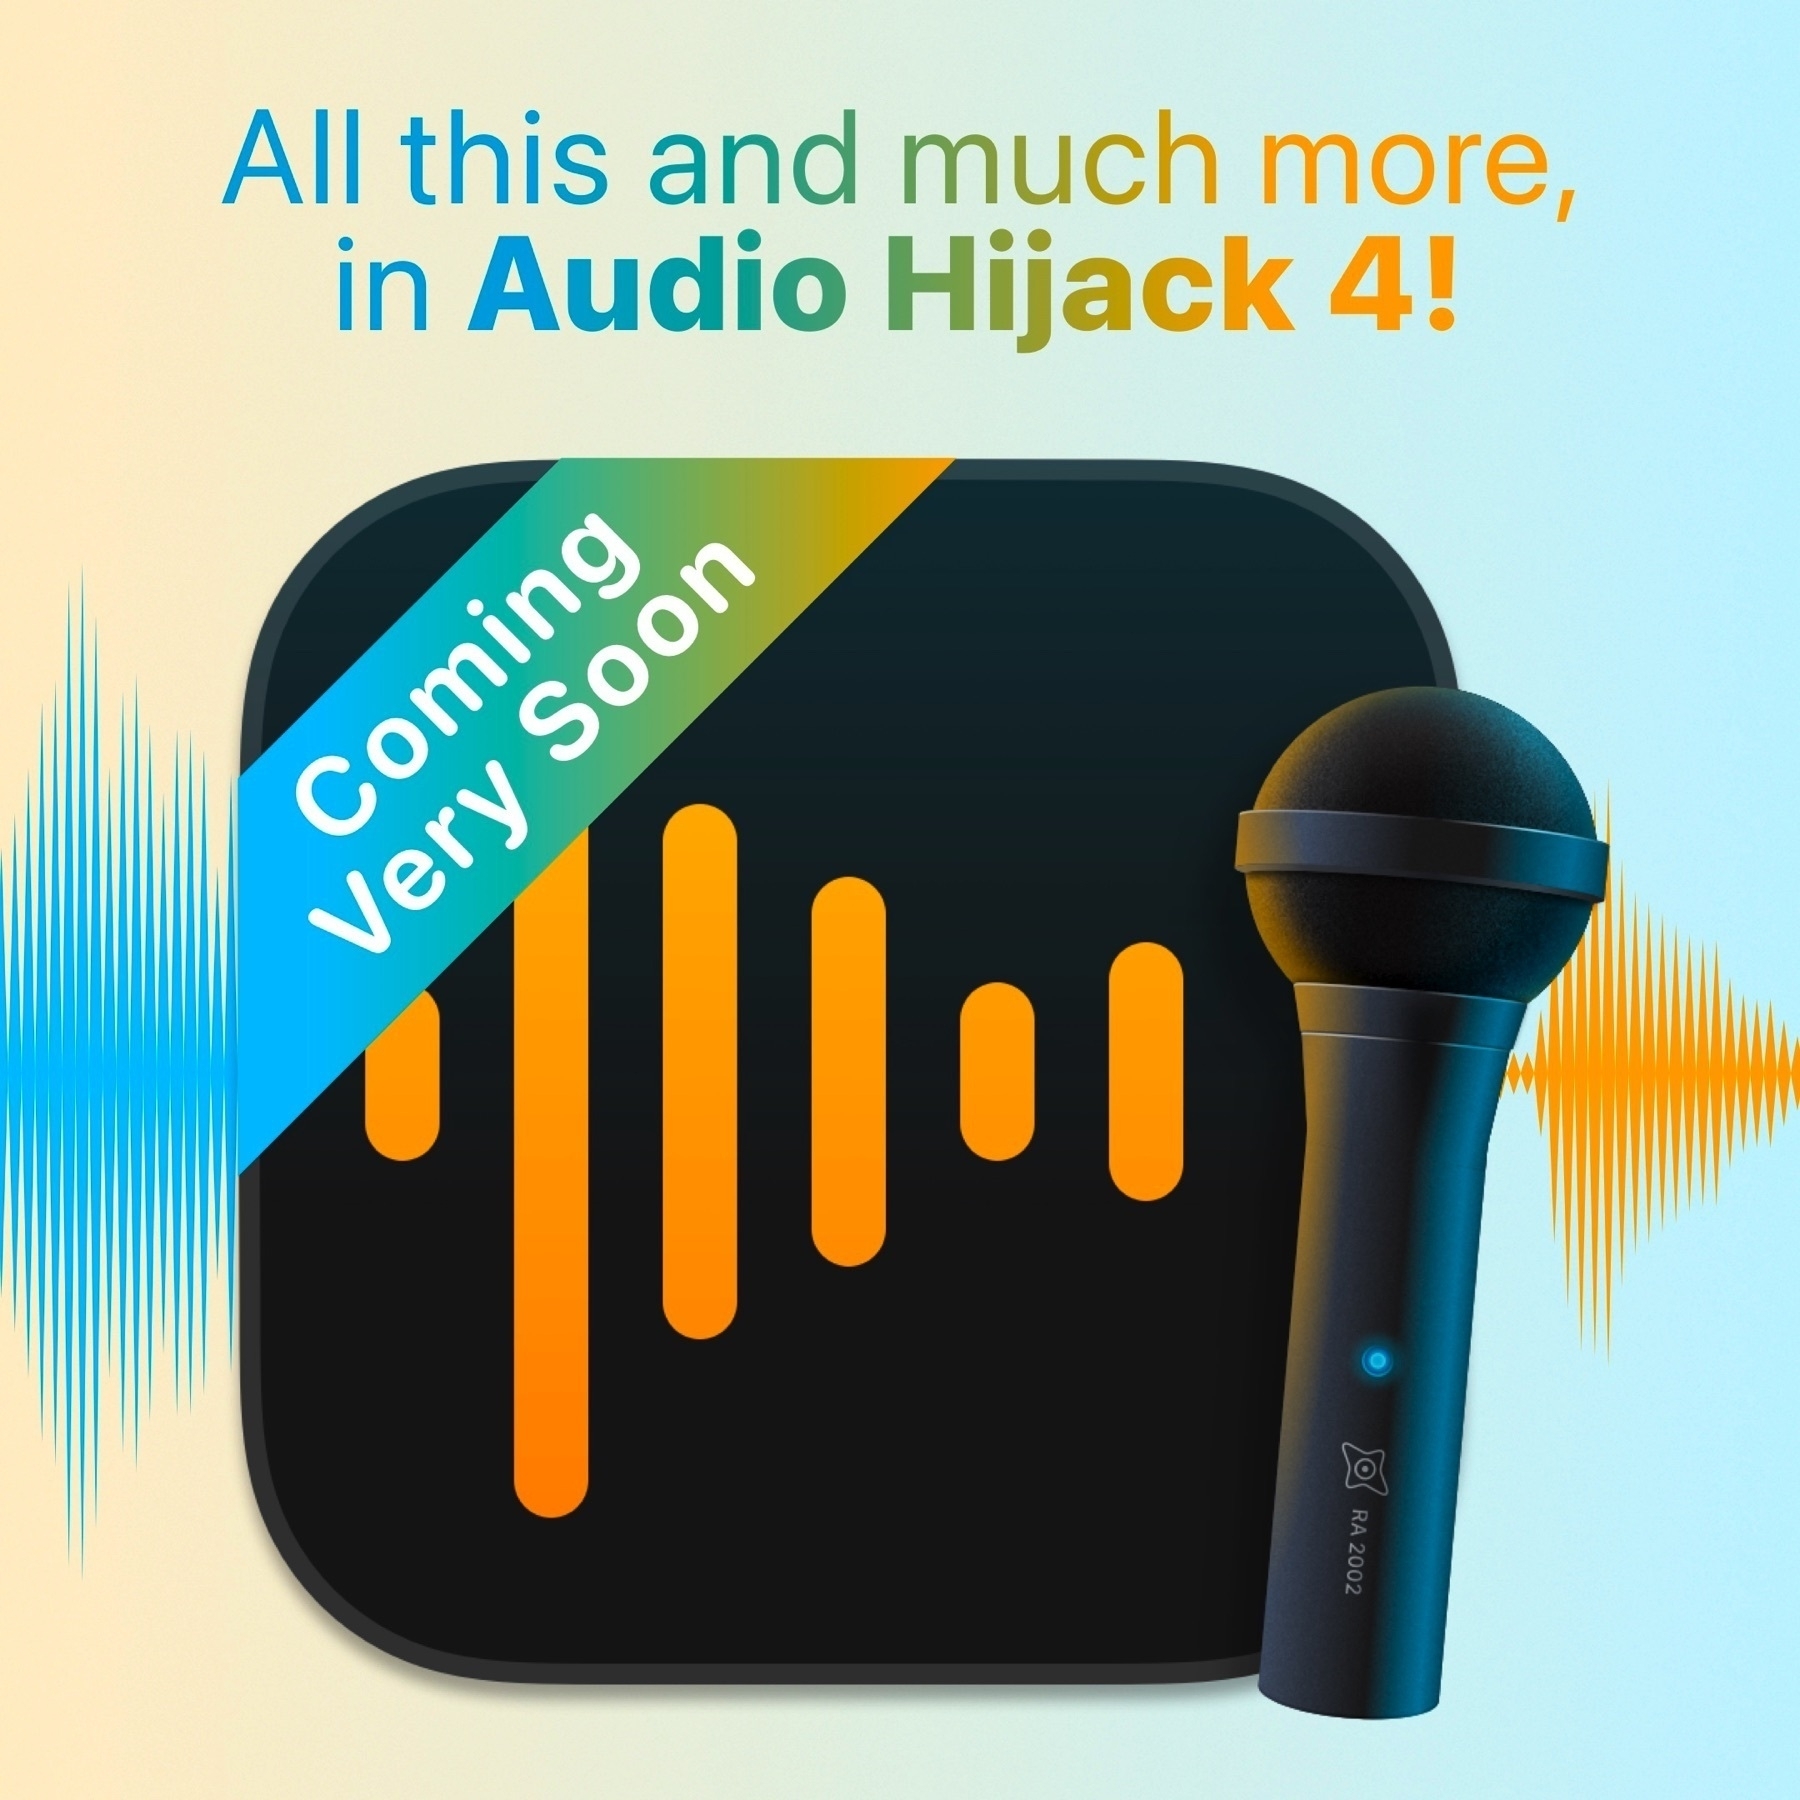 Audio Hijack’s new icon for v4